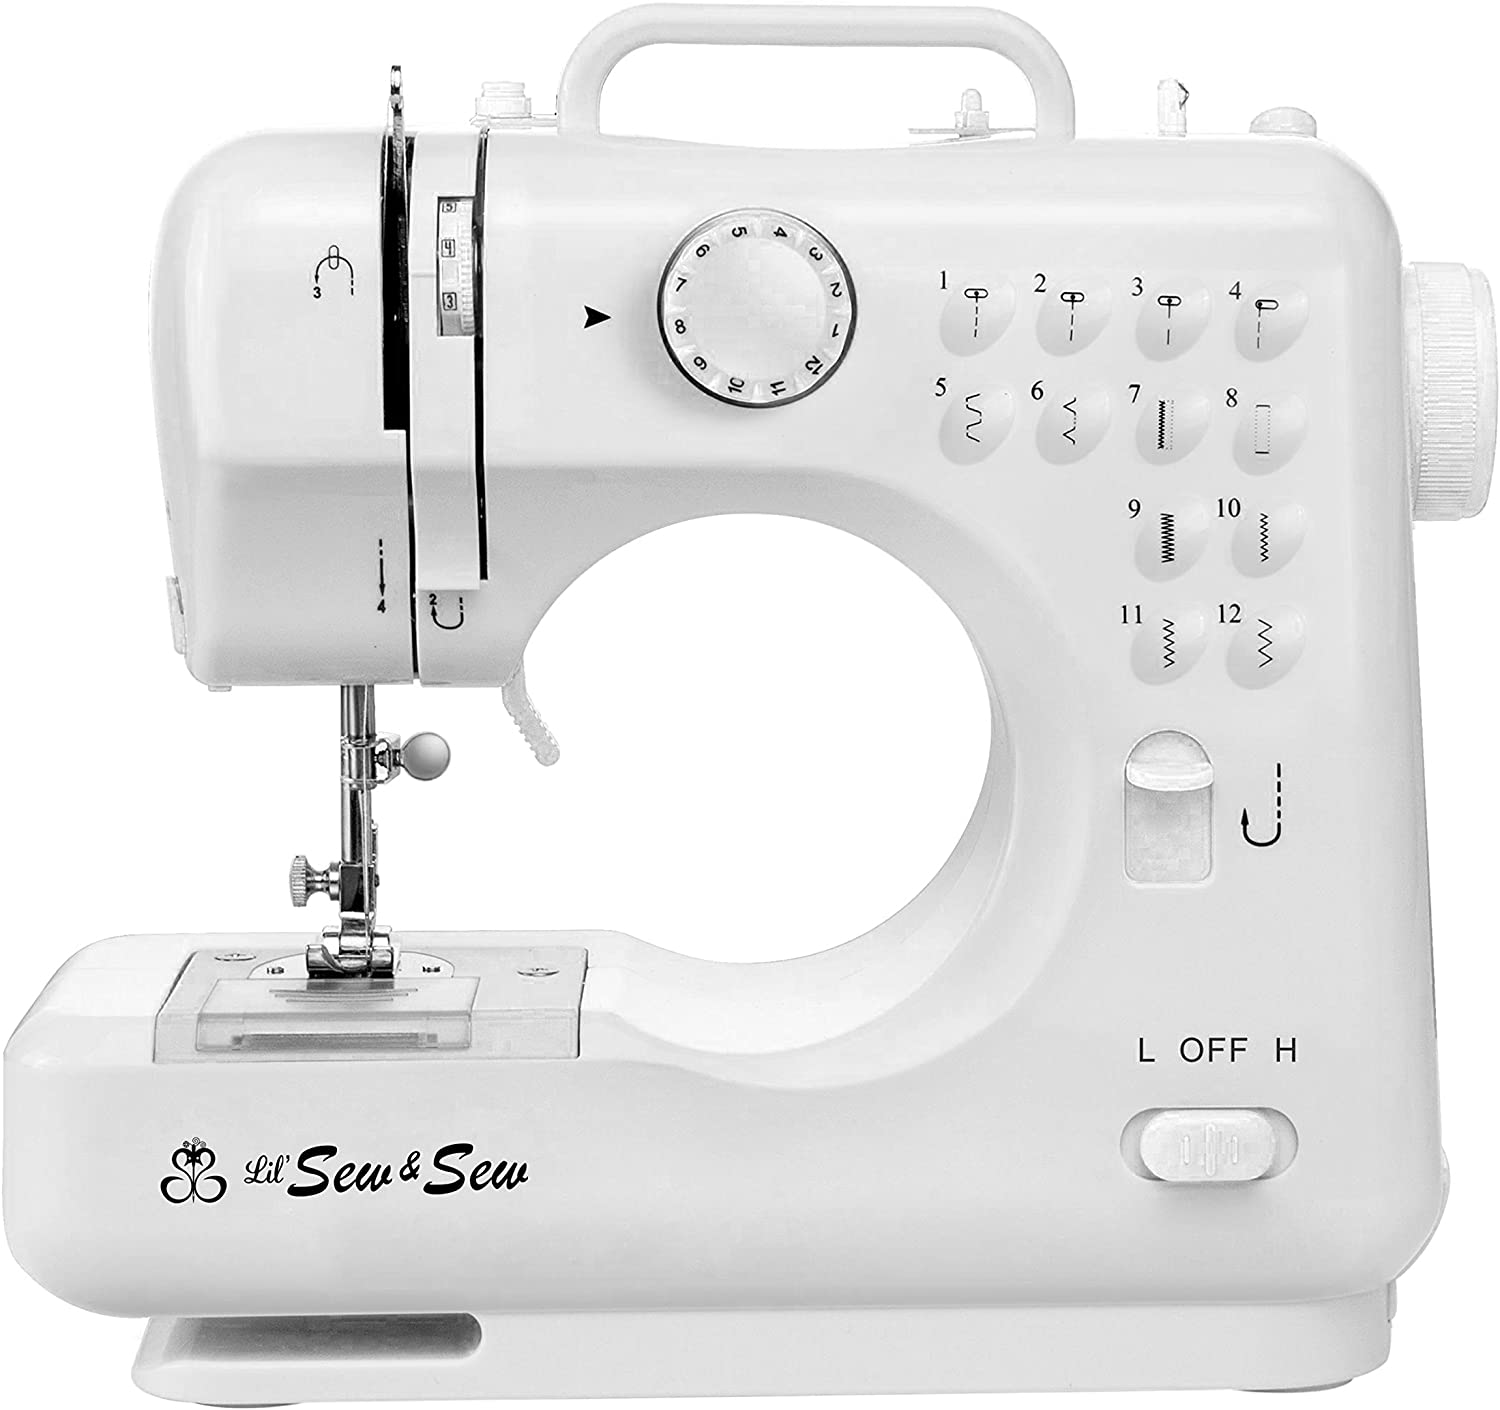 MICHLEY Stainless Steel Compact Sewing Machine, 12-Stitch